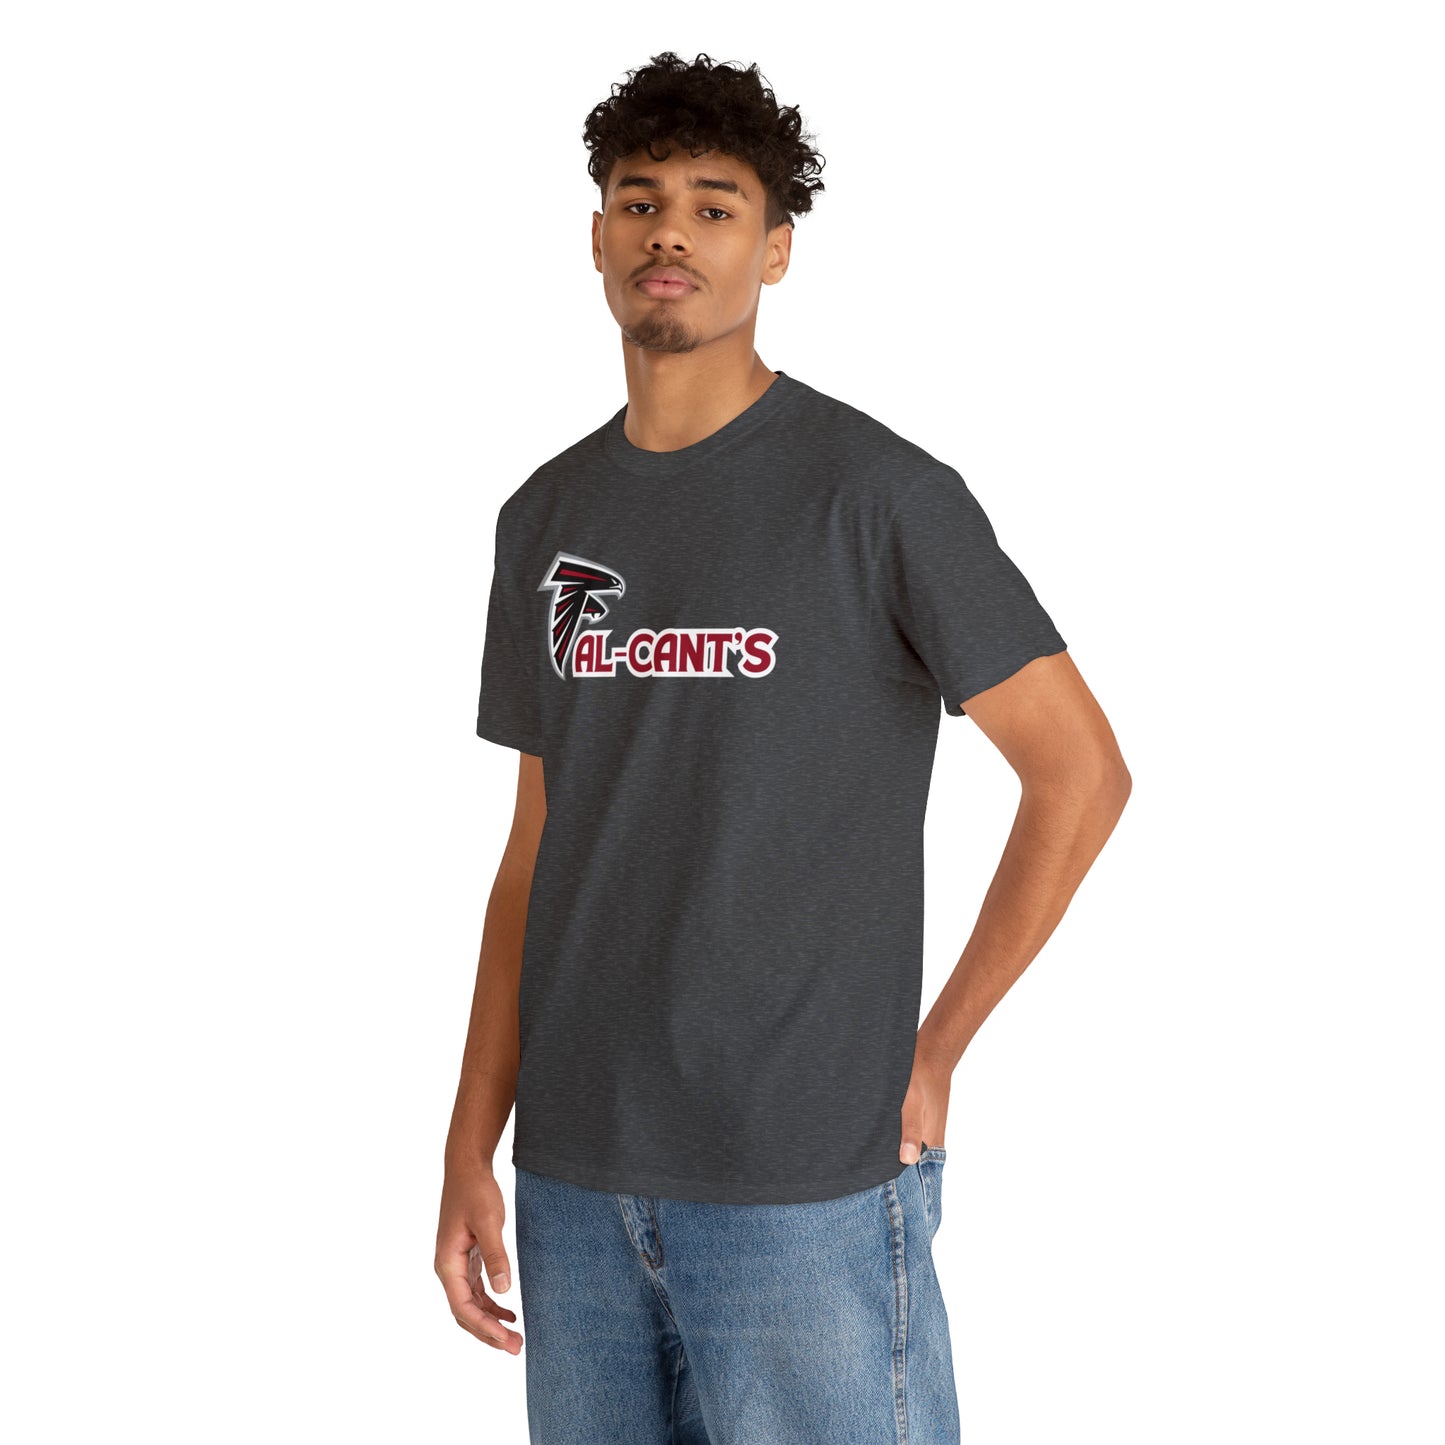 Fal-Cant's Unisex Heavy Cotton Tee